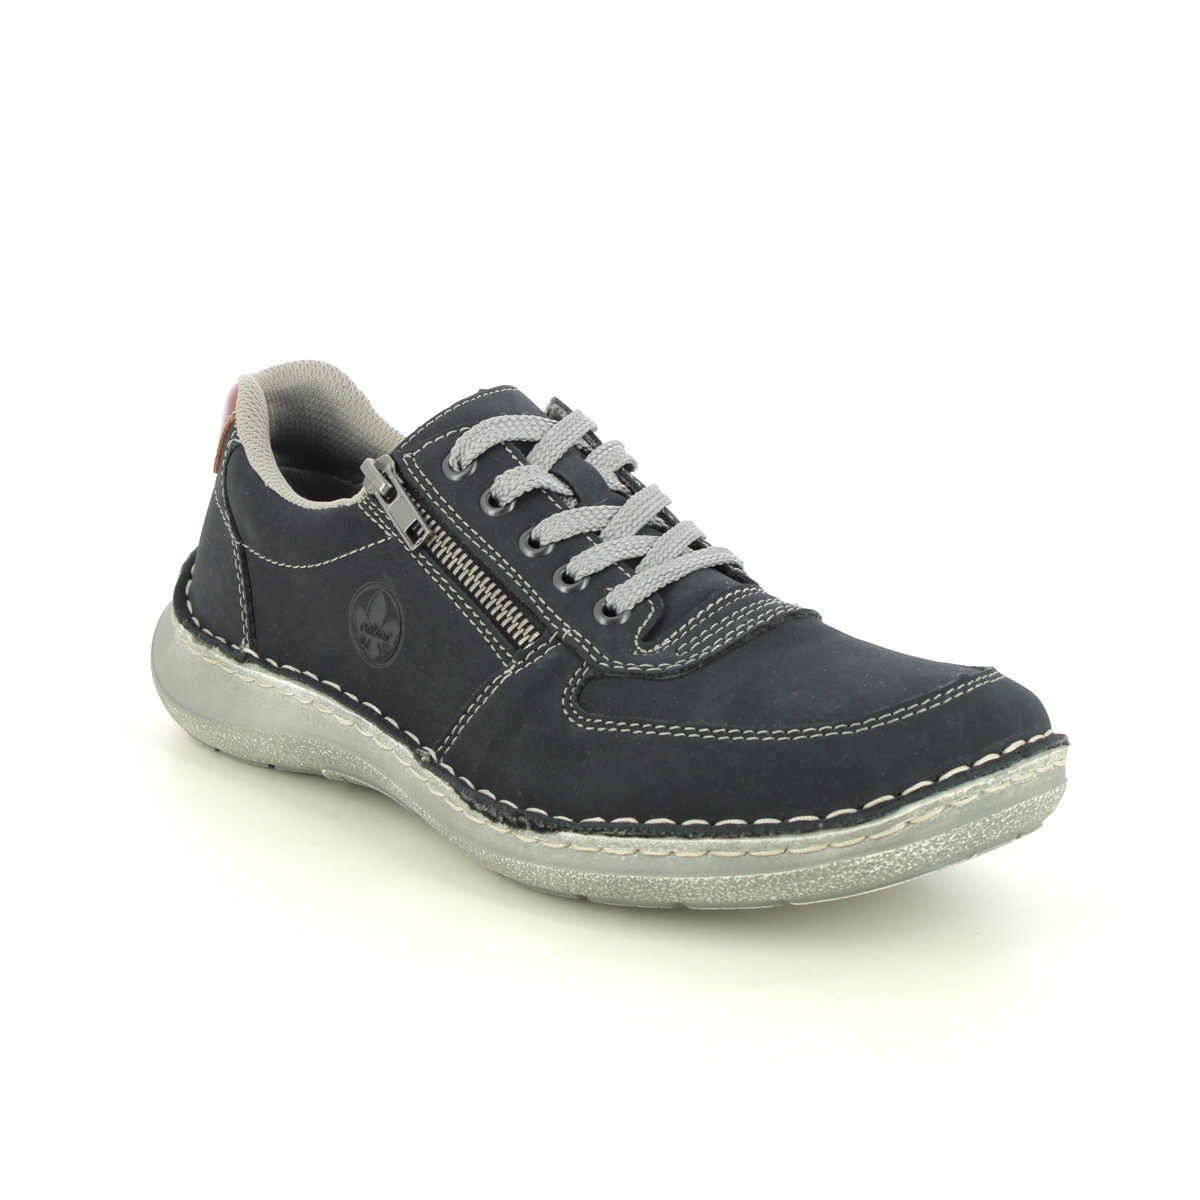 Rieker 03030-14 Navy Mens comfort shoes in a Plain Man-made in Size 45